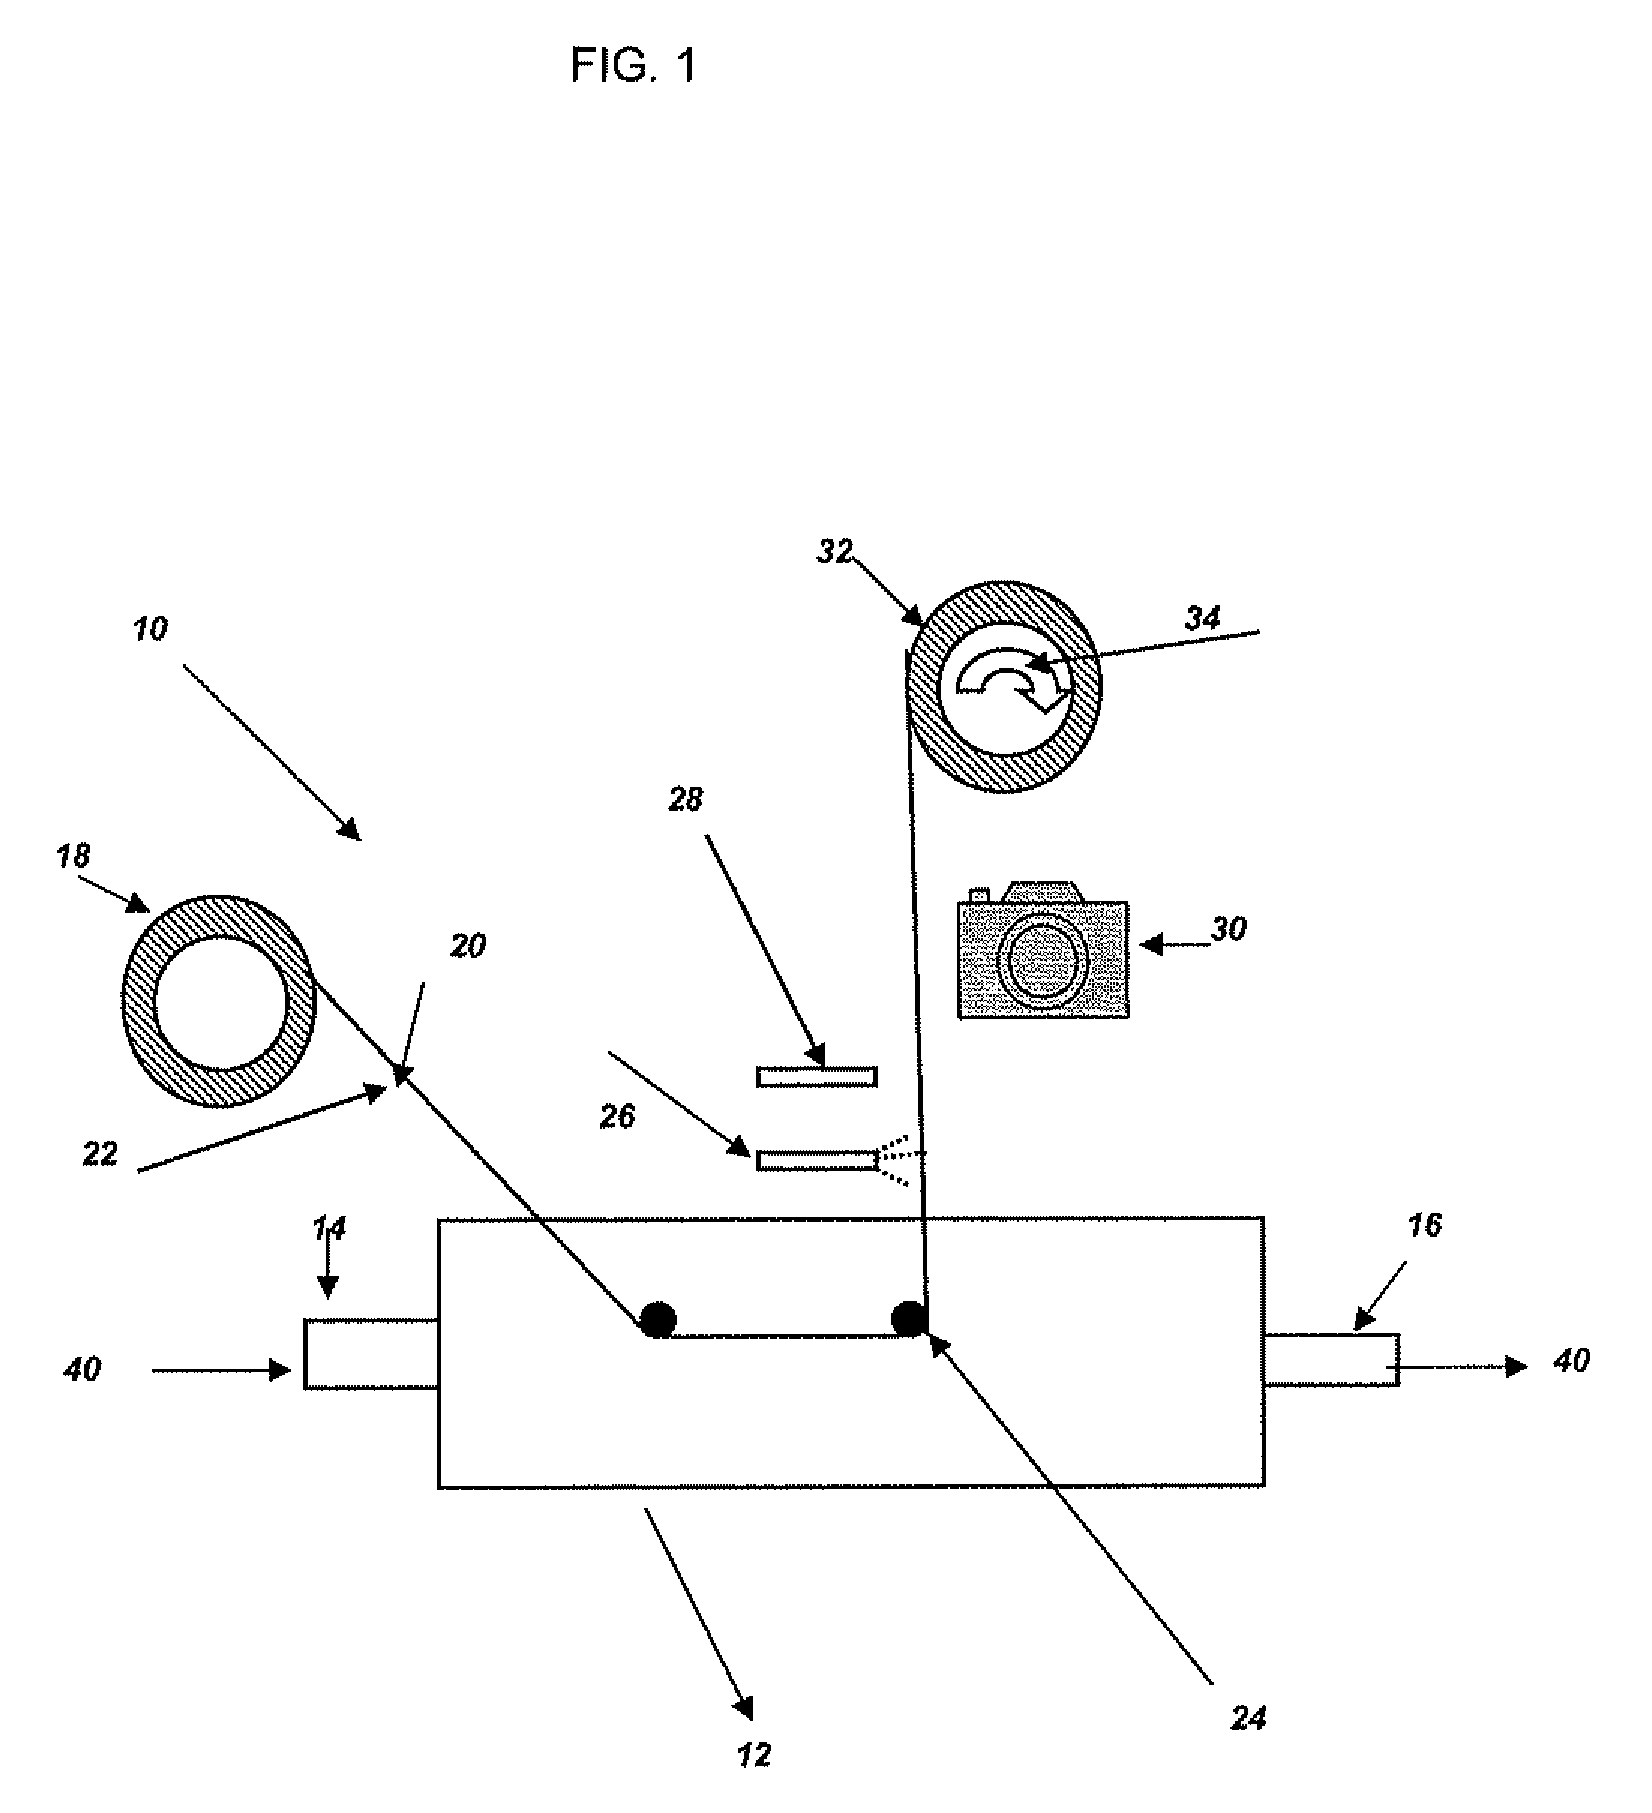 Method and apparatus for measuring deposition of particulate contaminants in pulp and paper slurries